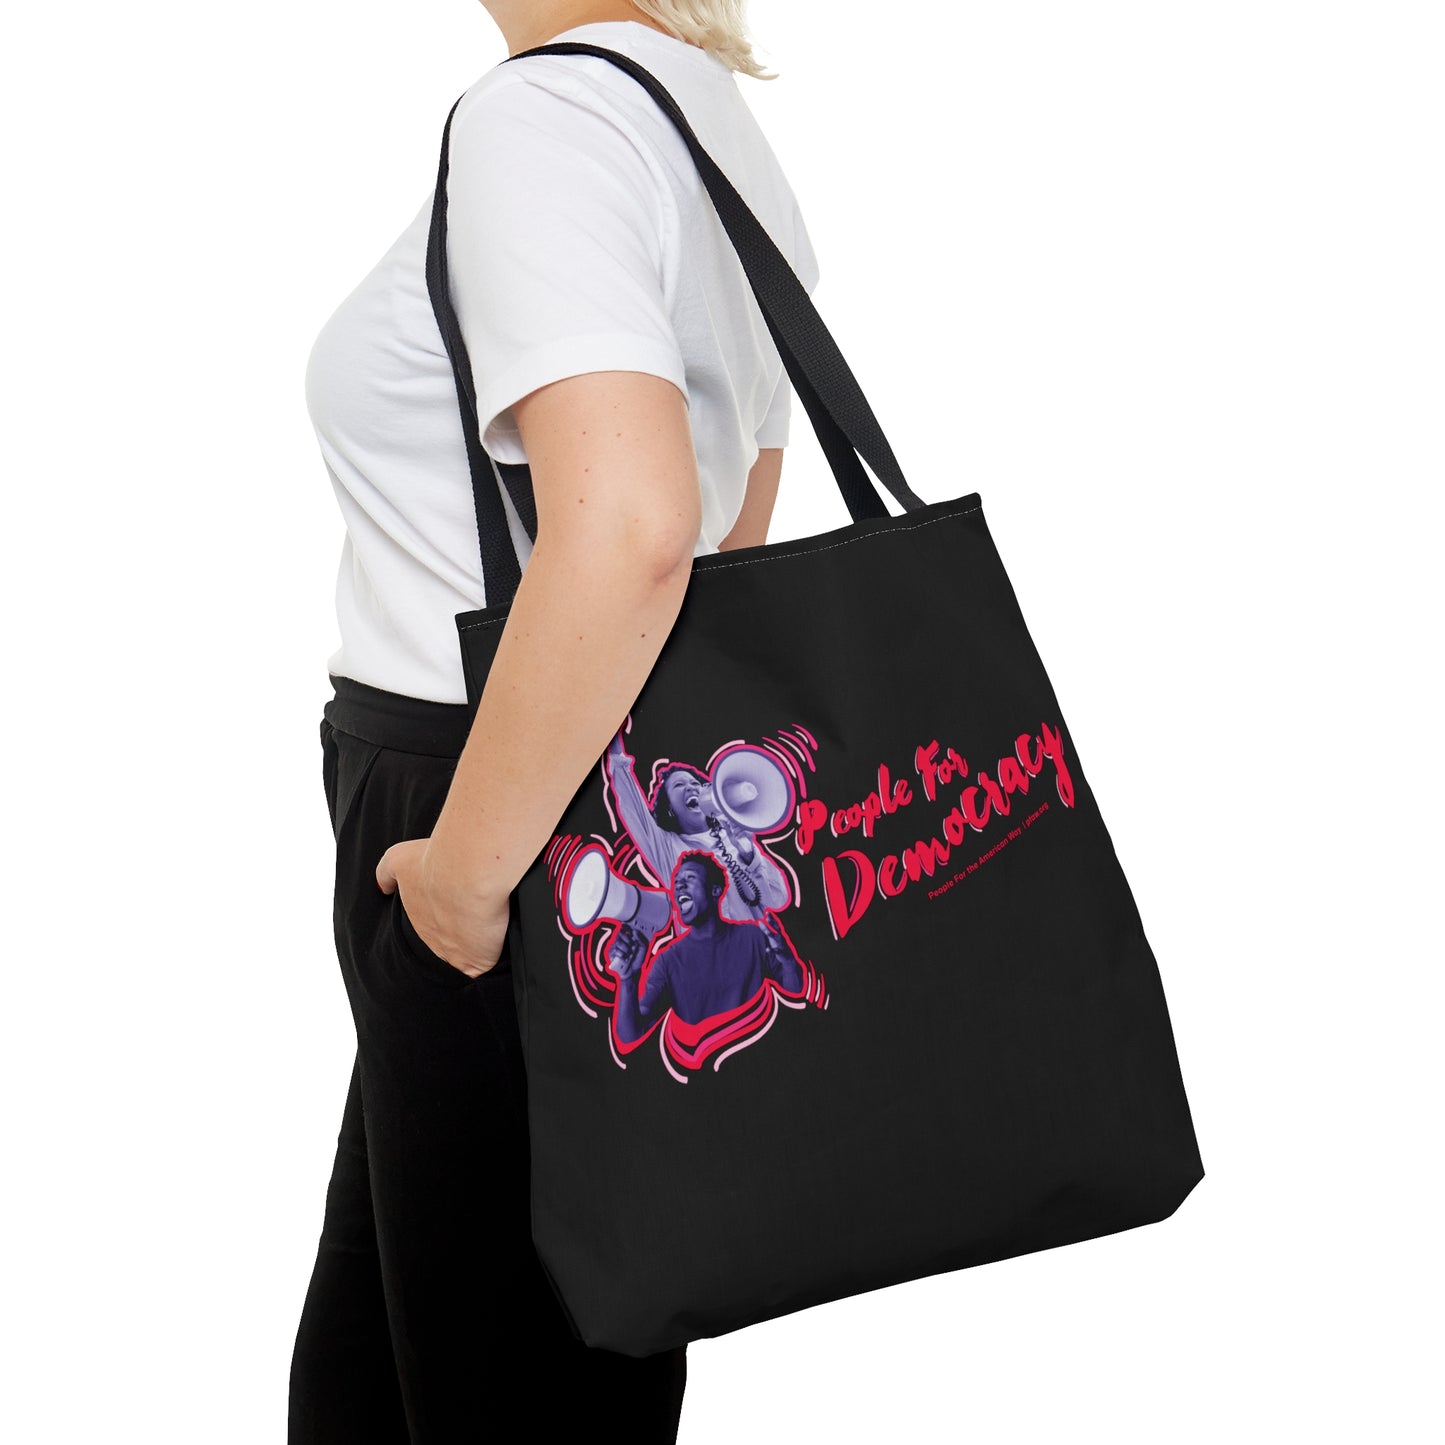 People For Democracy Tote - Black